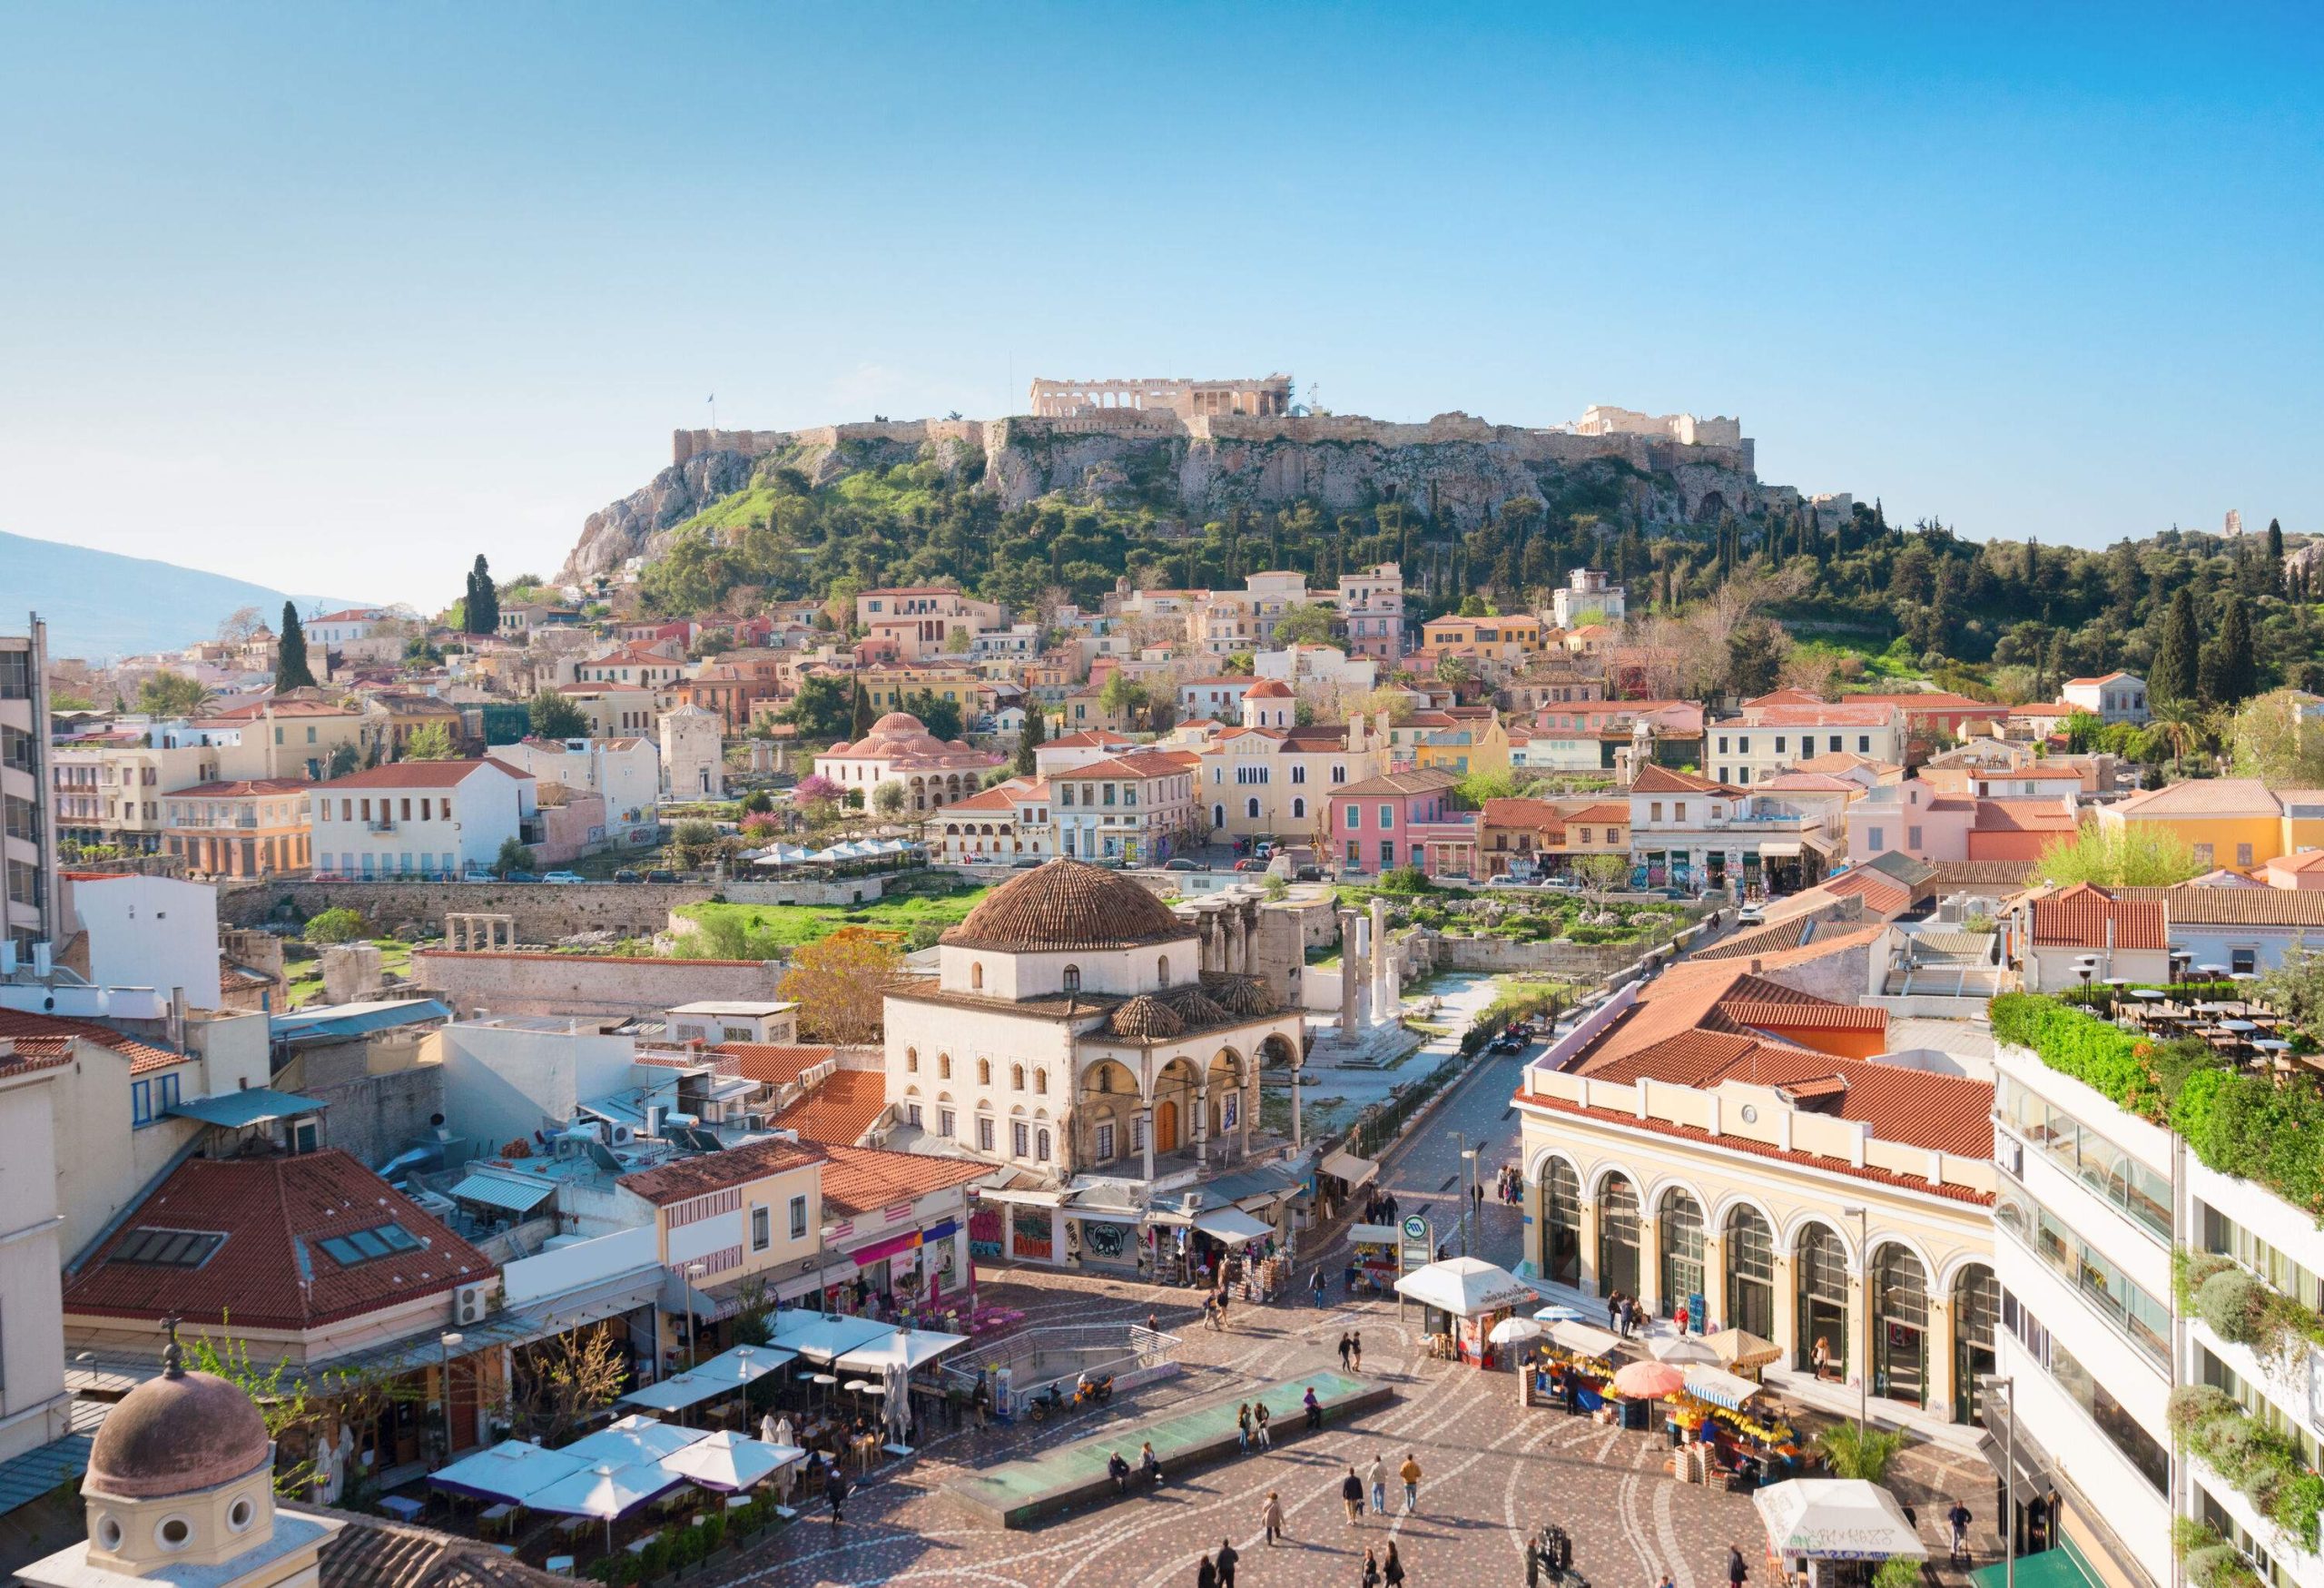 A cityscape with a market square in the middle and the Acropolis in the background.